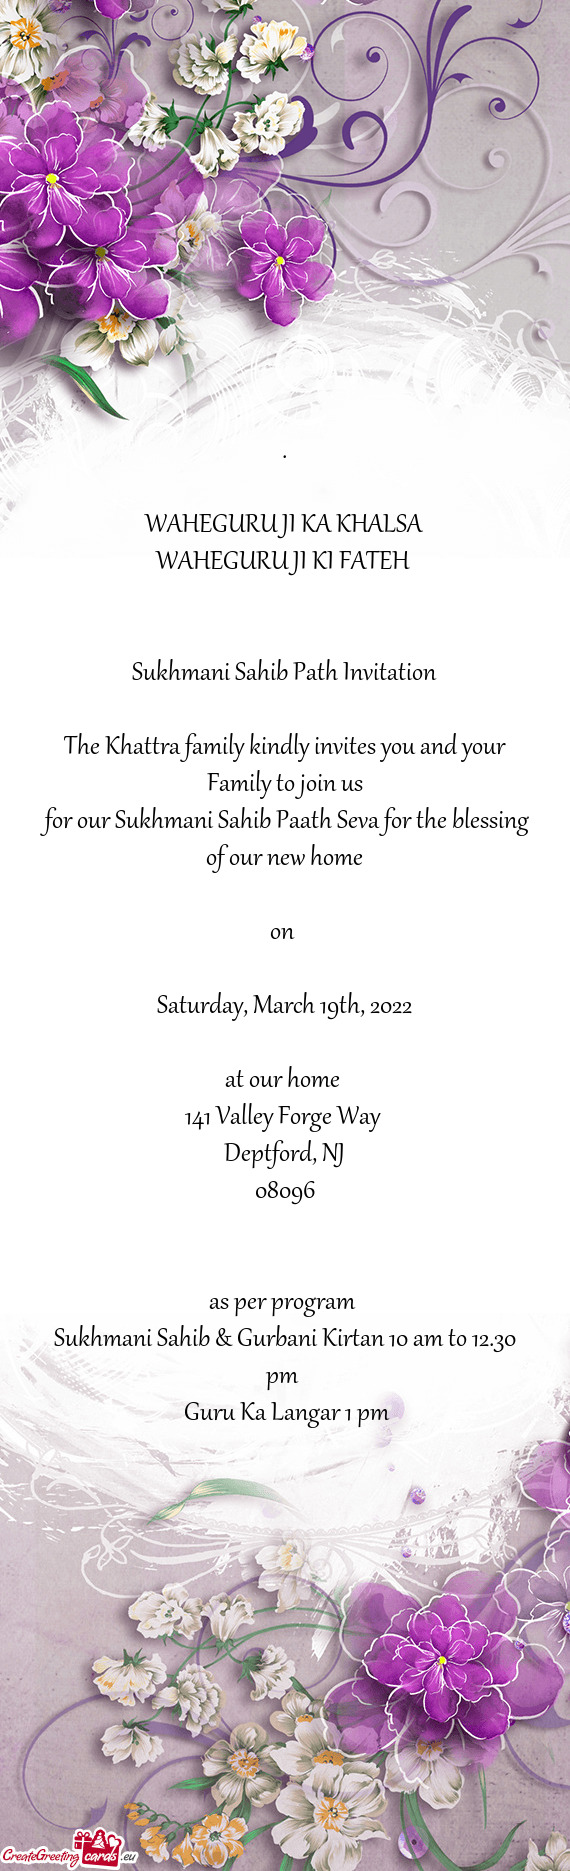 For our Sukhmani Sahib Paath Seva for the blessing of our new home